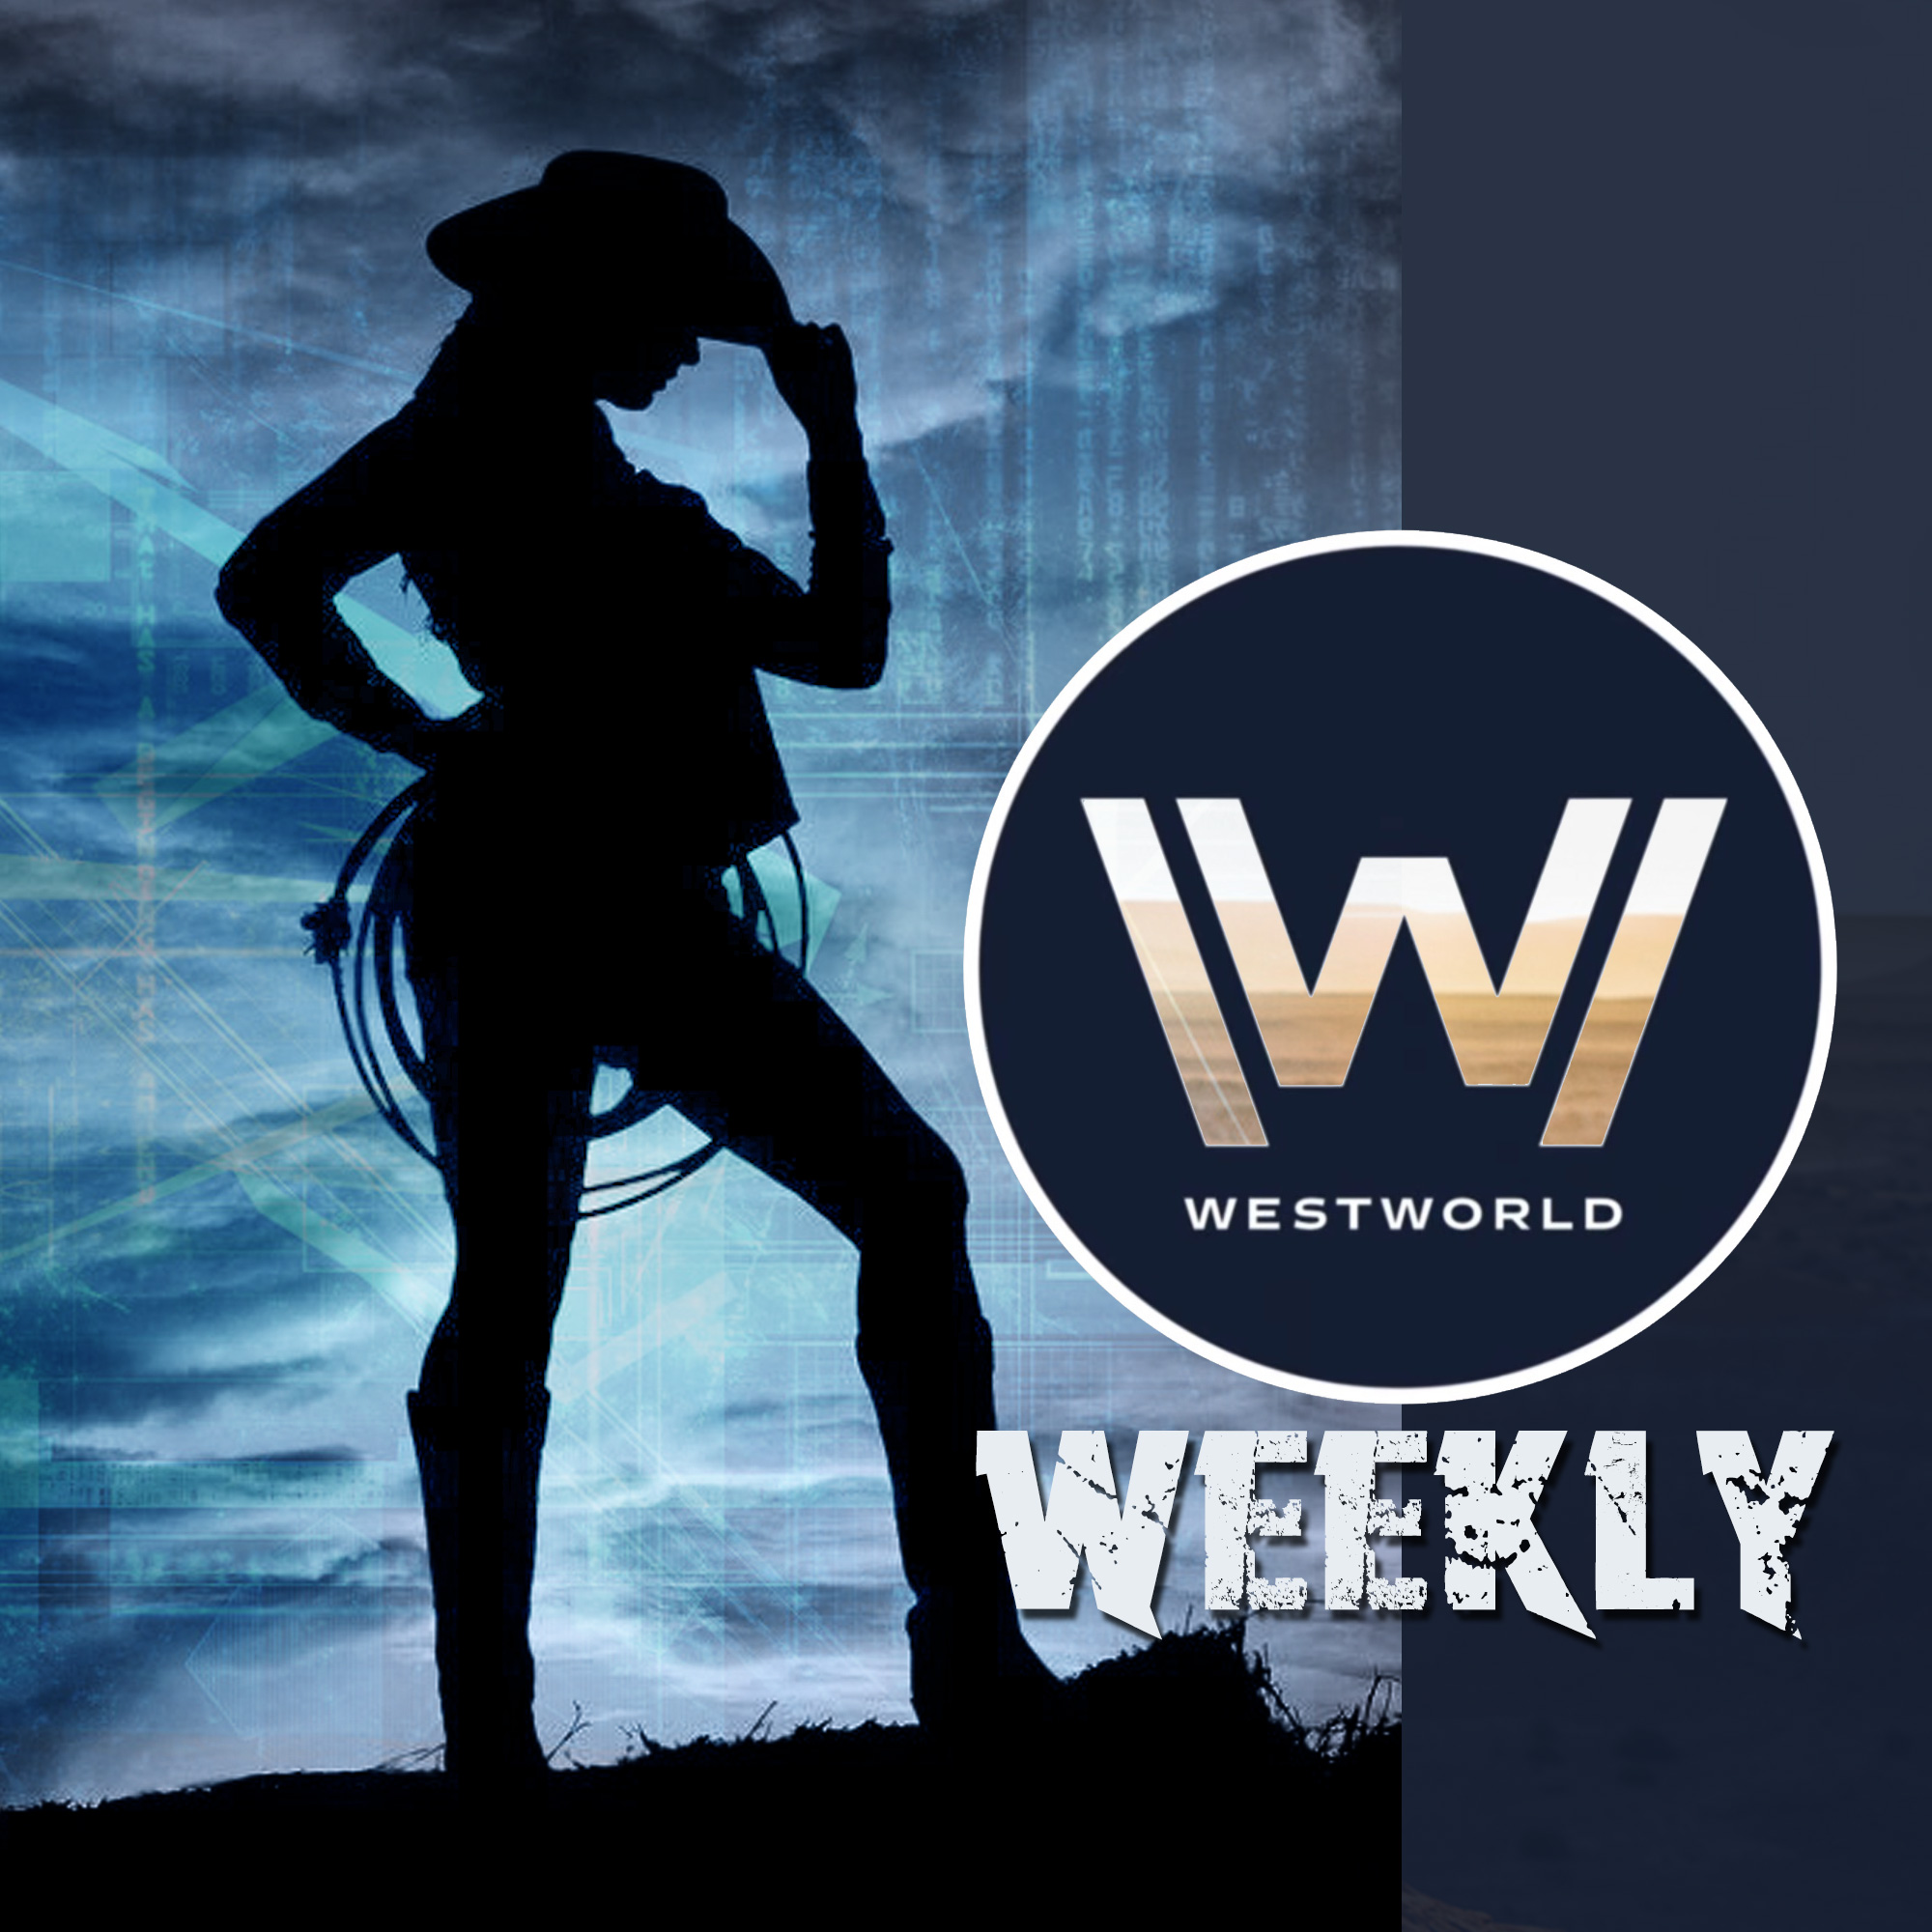 West World Weekly Podcast 5 Episode 9 The Well-Tempered Clavier